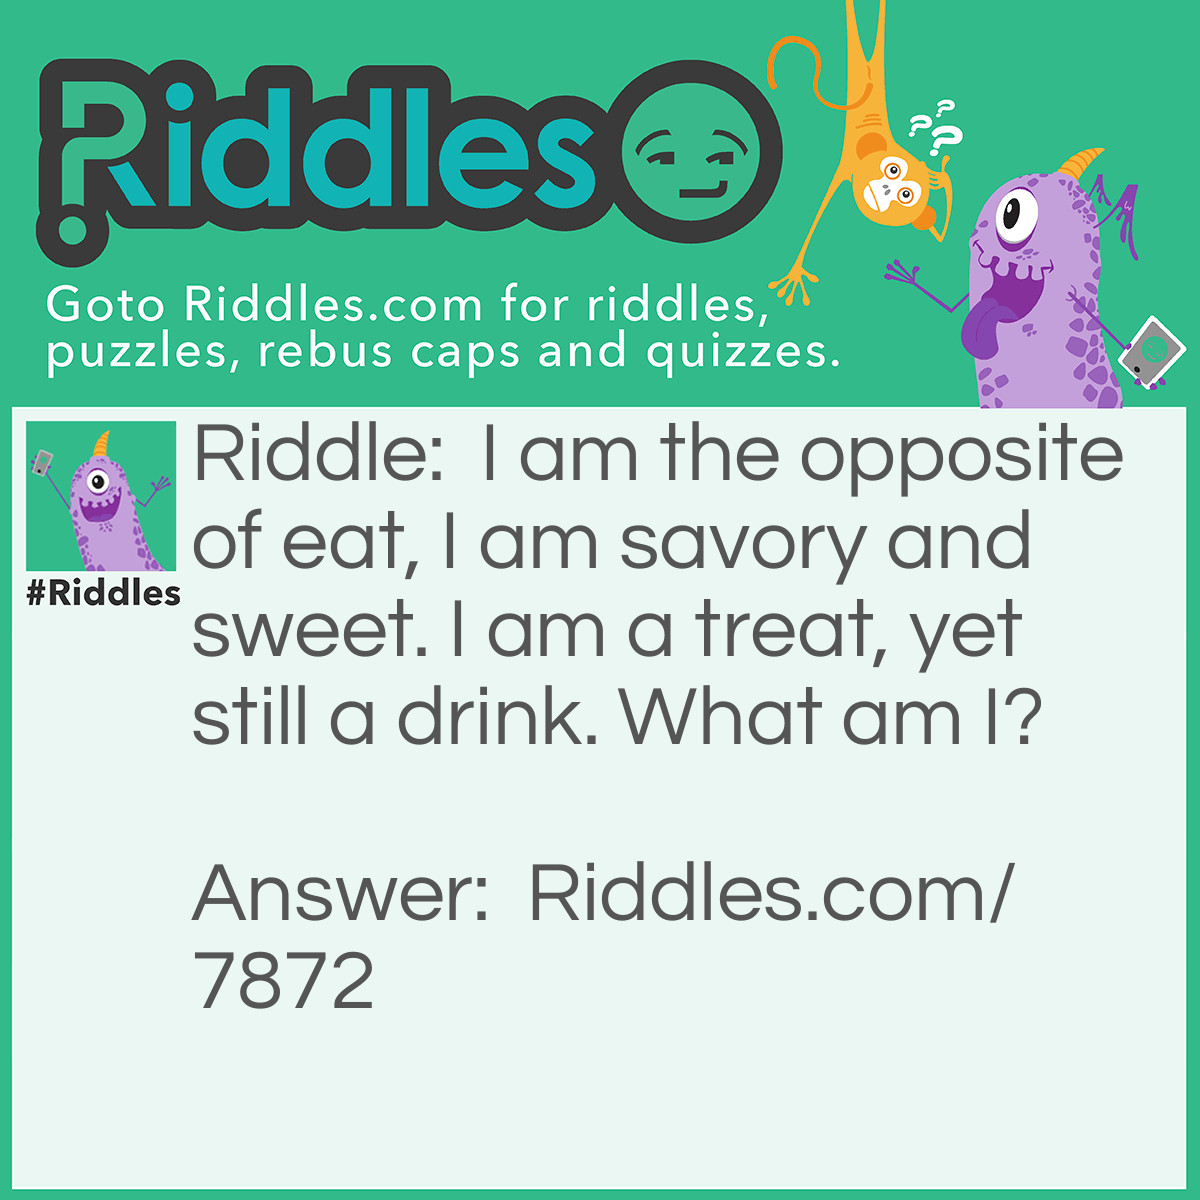 Riddle: I am the opposite of eat, I am savory and sweet. I am a treat, yet still a drink. What am I? Answer: Tea.